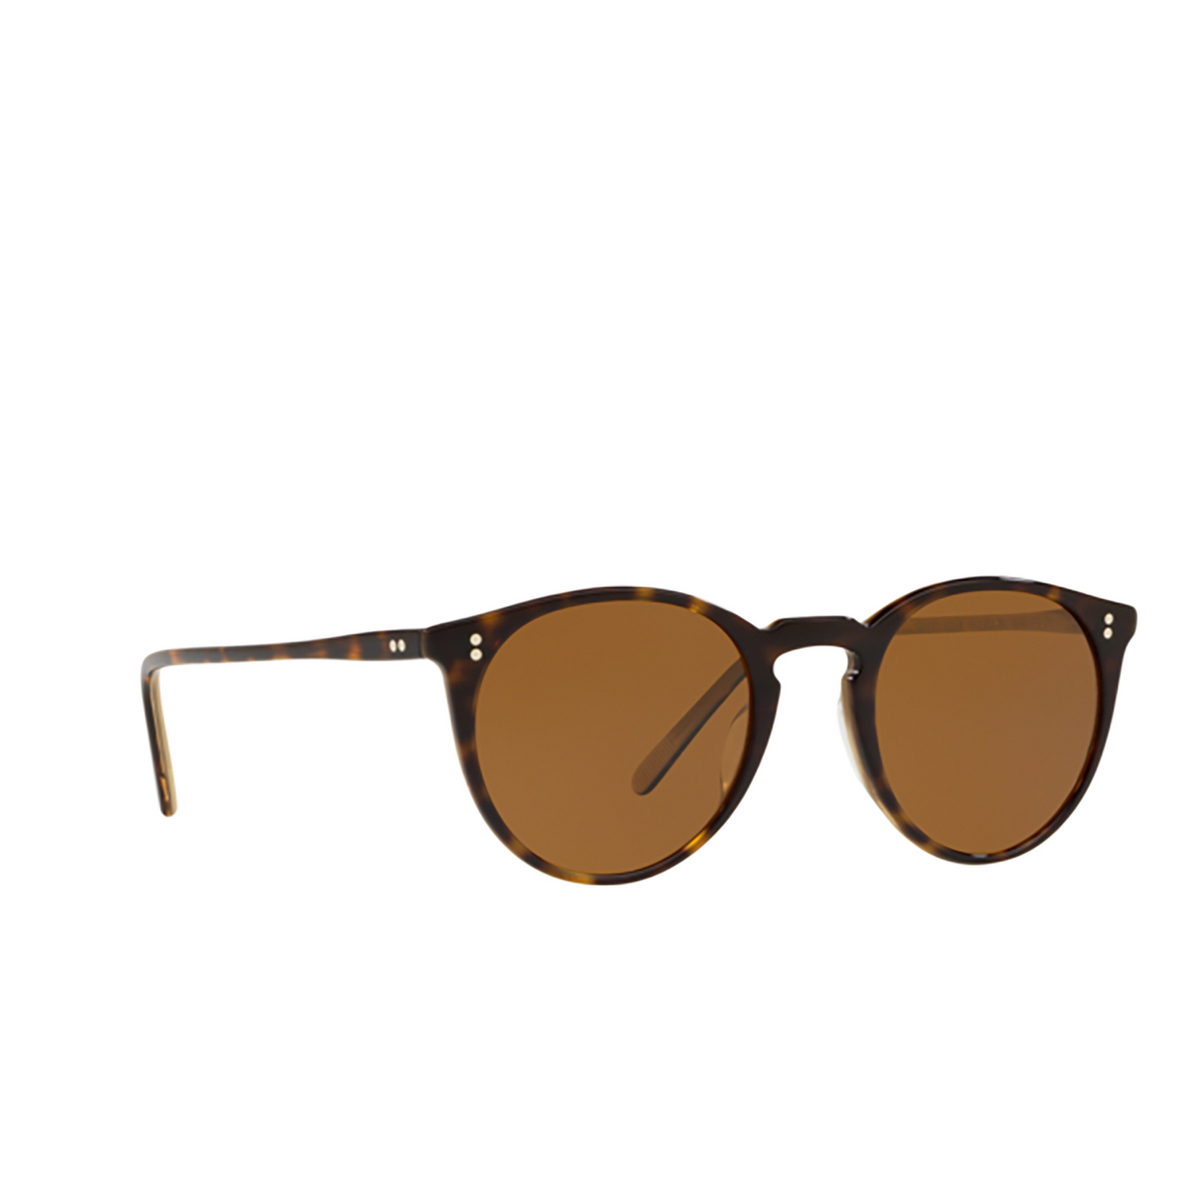 Oliver Peoples O'MALLEY Sunglasses 166653 362 / HORN - three-quarters view